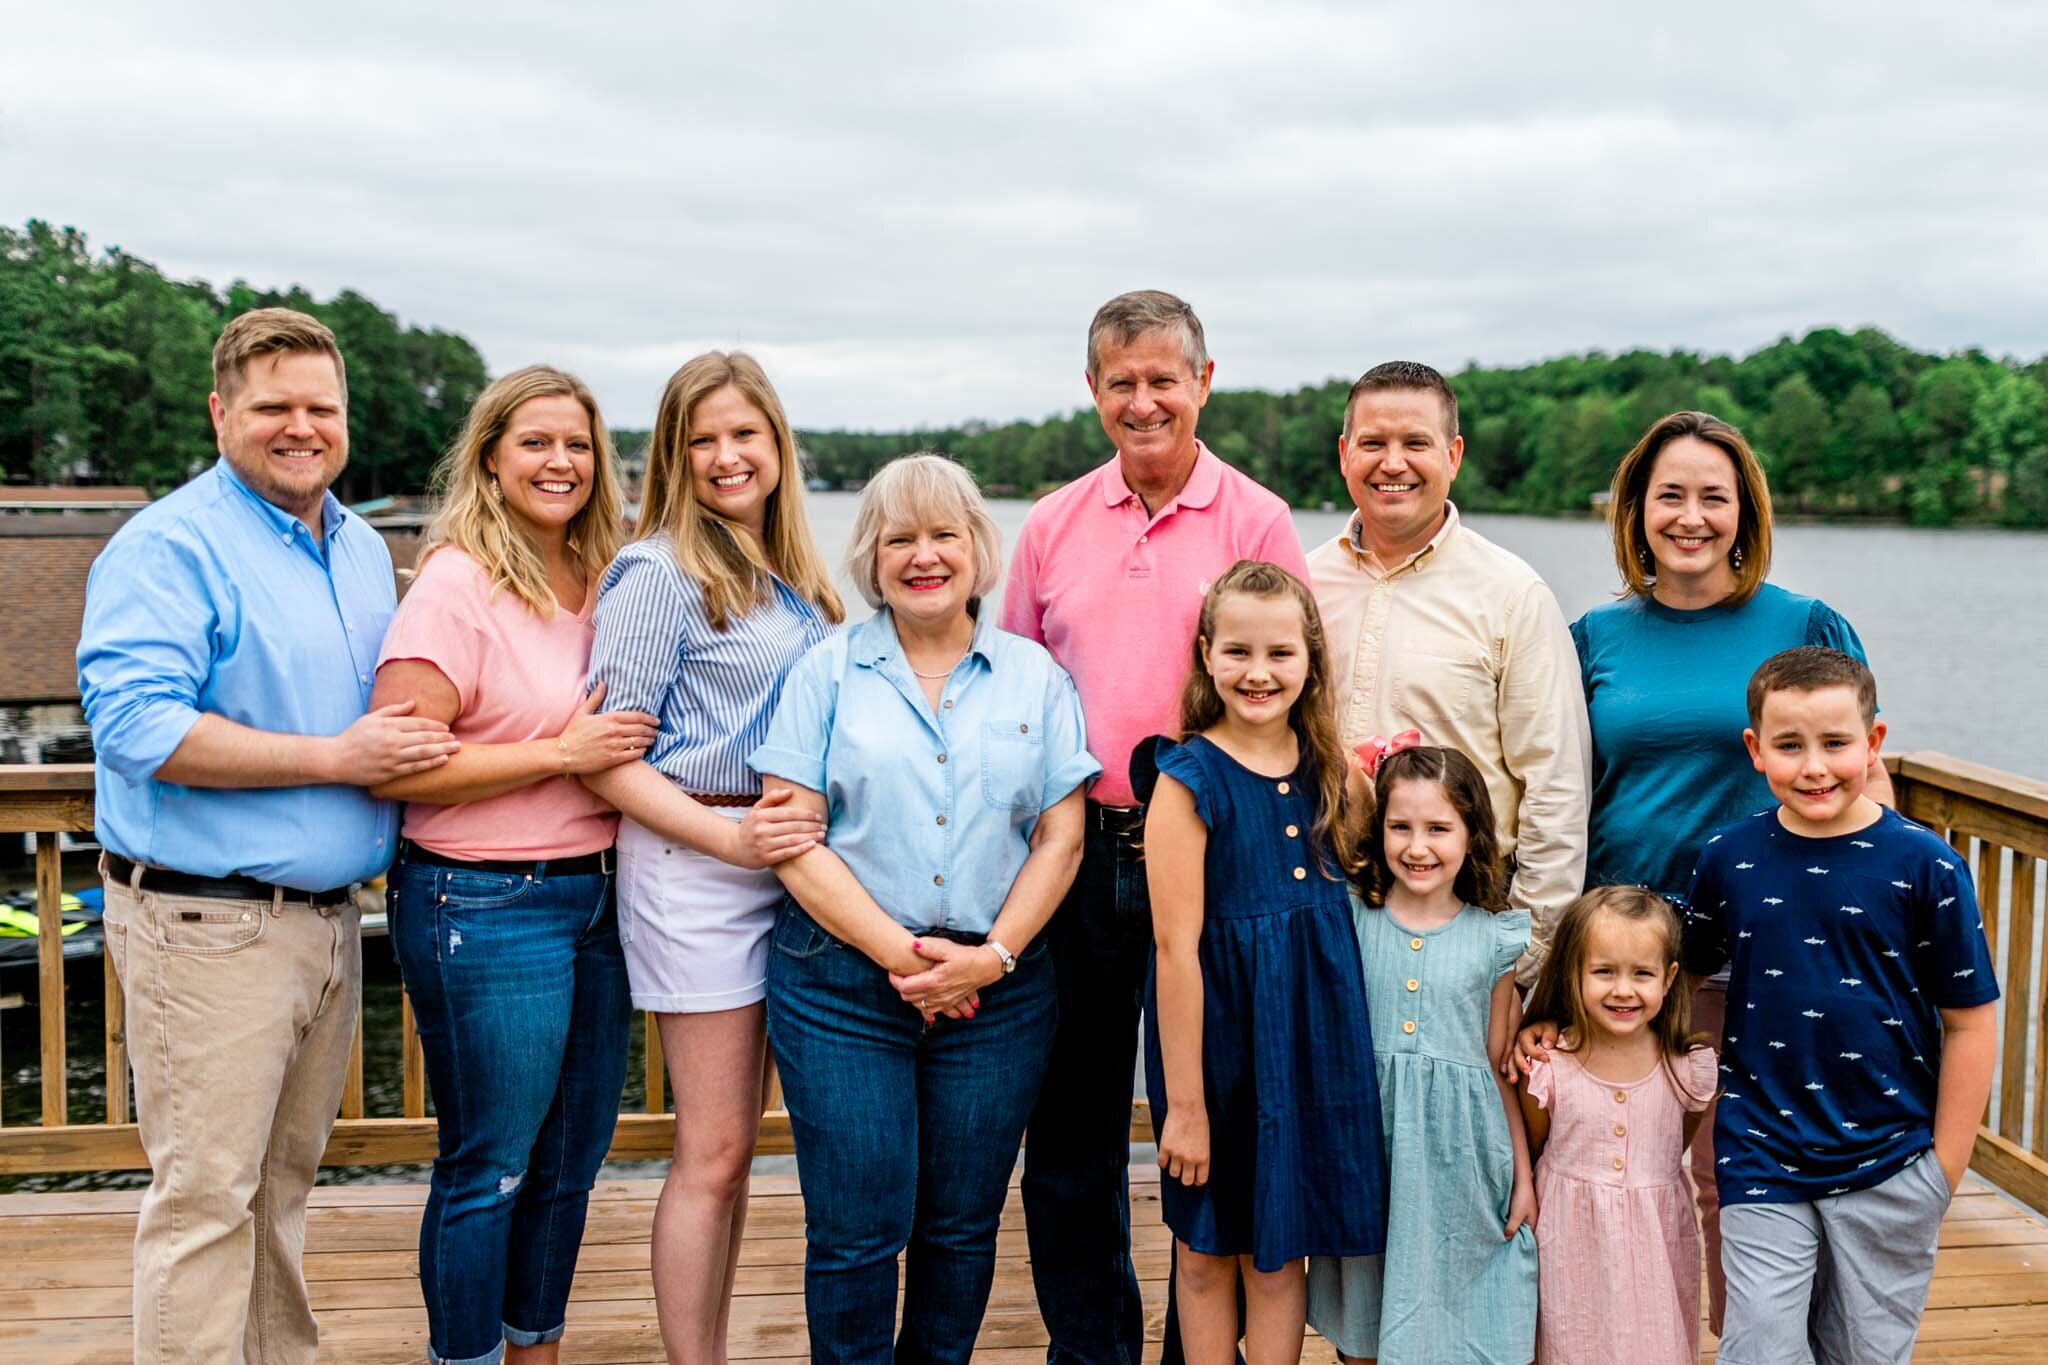 Lake Gaston Family Photographer | By G. Lin Photography | Summer family photo outside on dock